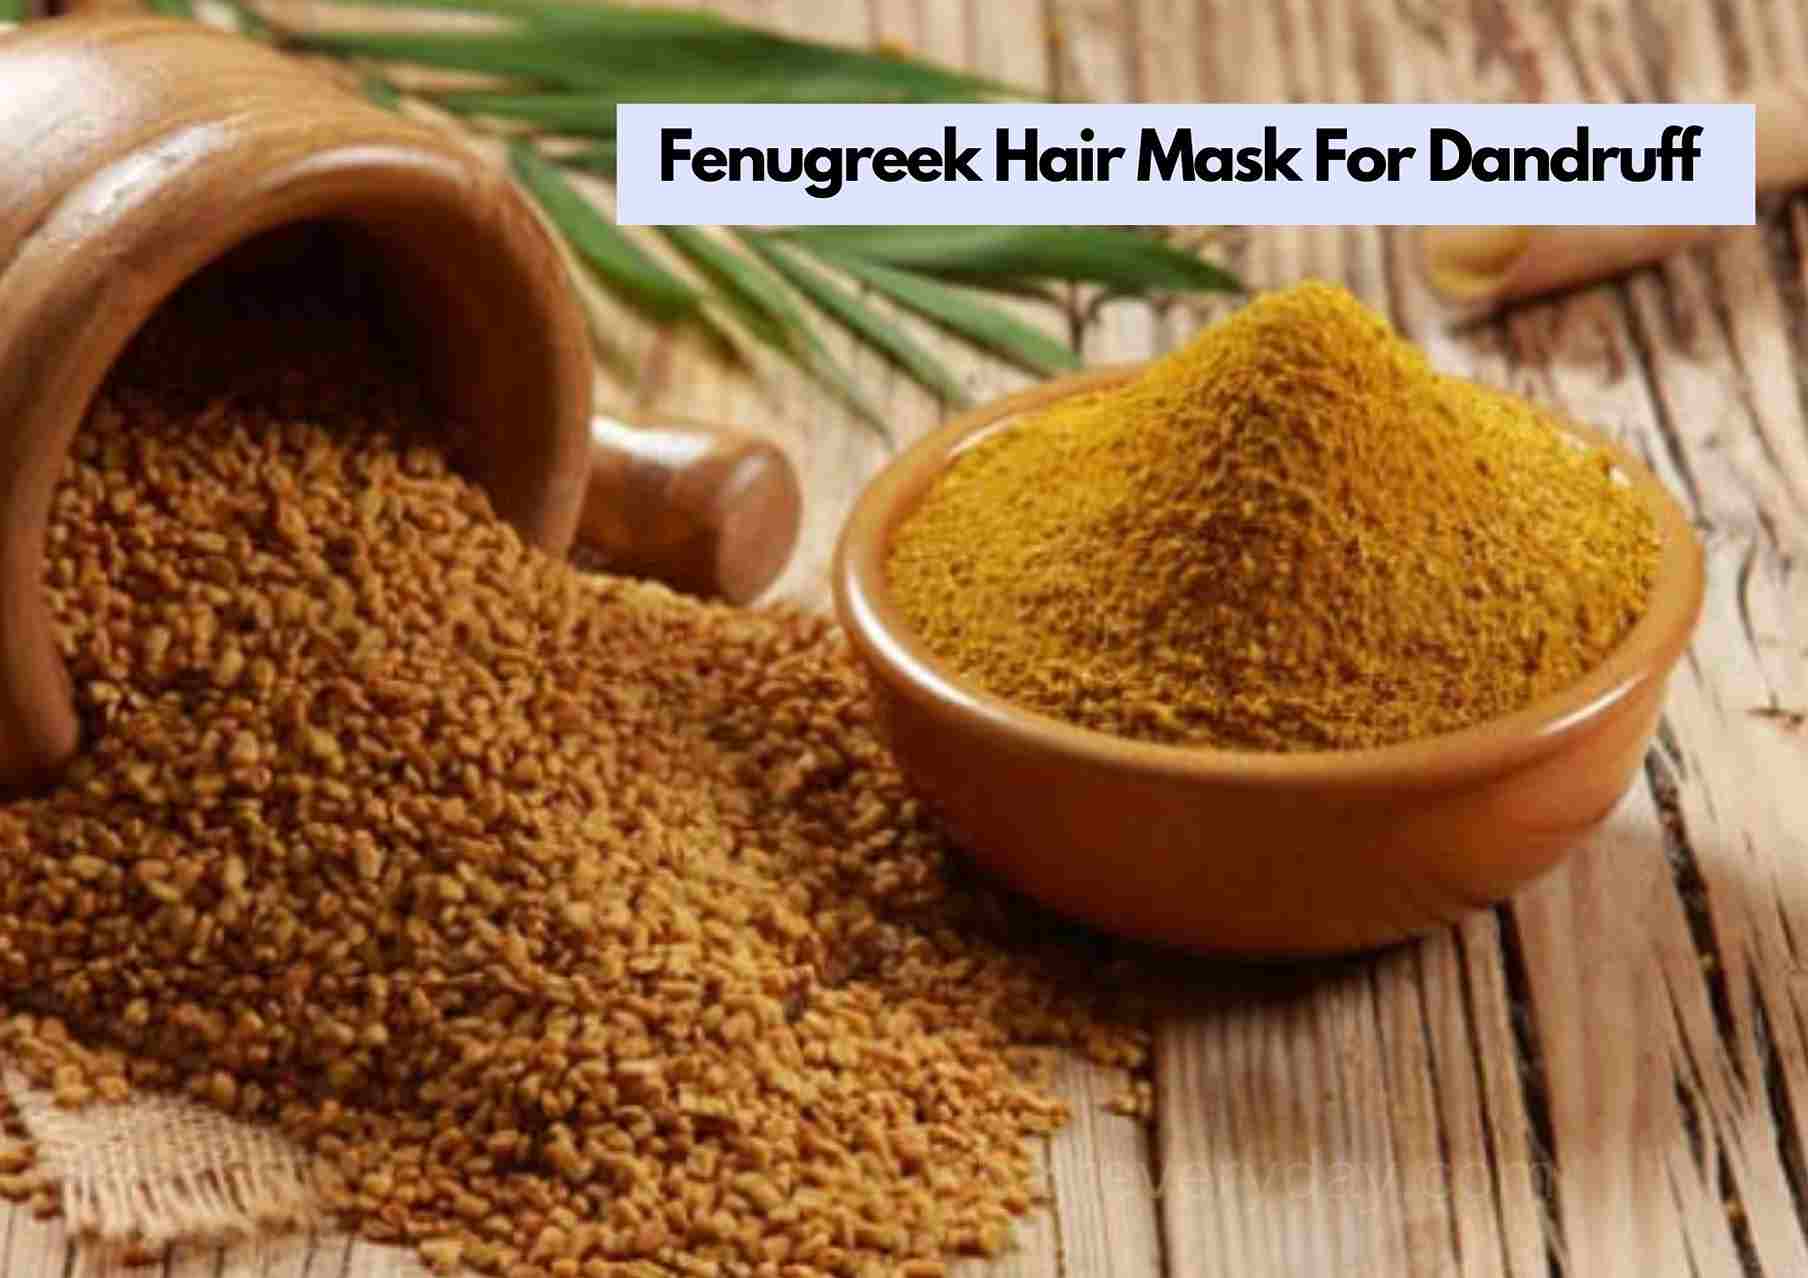 Fenugreek Seeds For Hair: Benefits, How To Use, & Side Effects